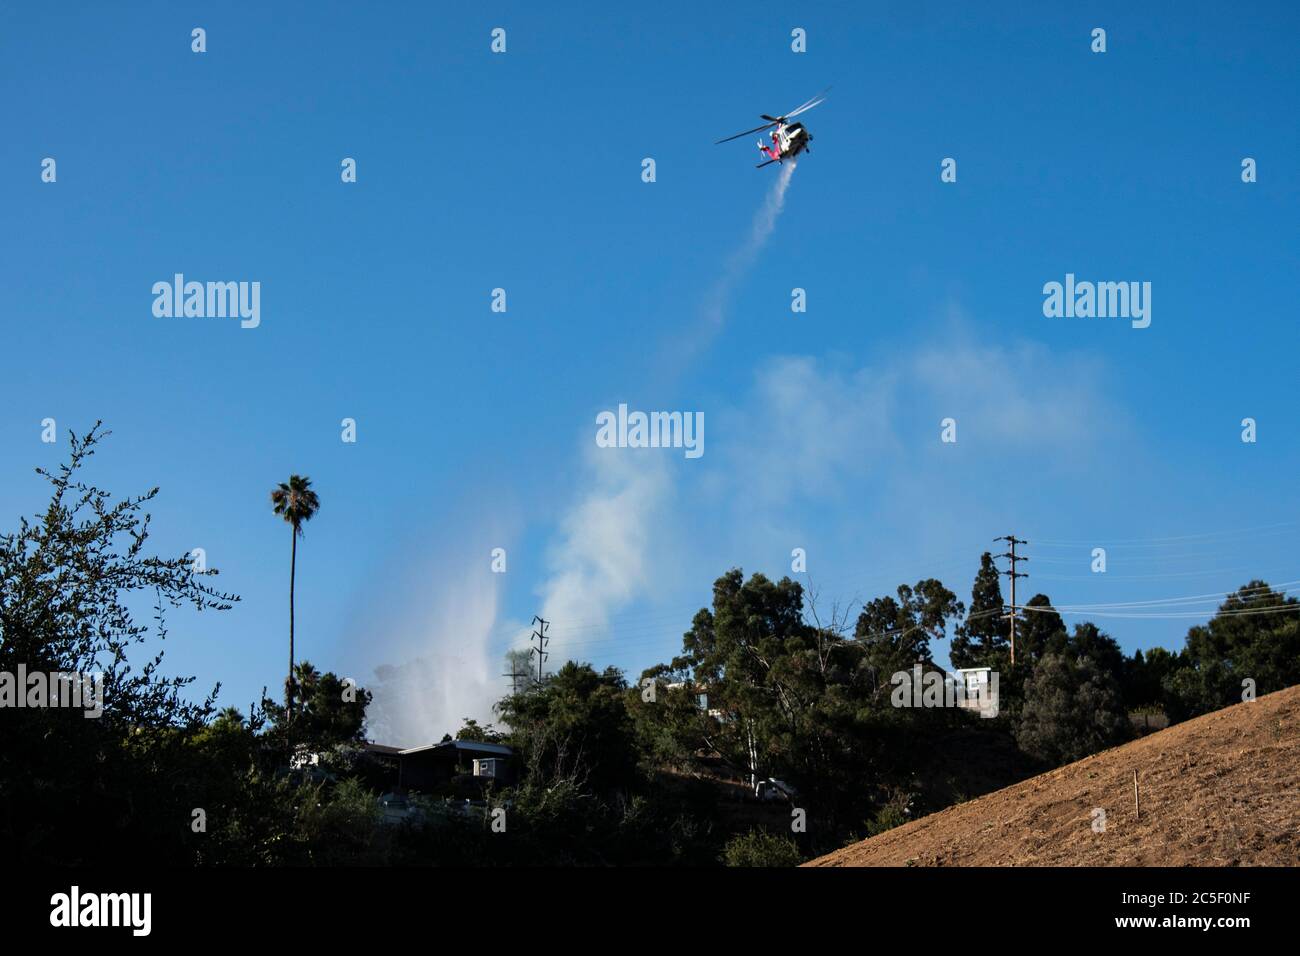 Emergency firefighting helicopter drops water on a brush fire saving homes in a California wild fire. Stock Photo